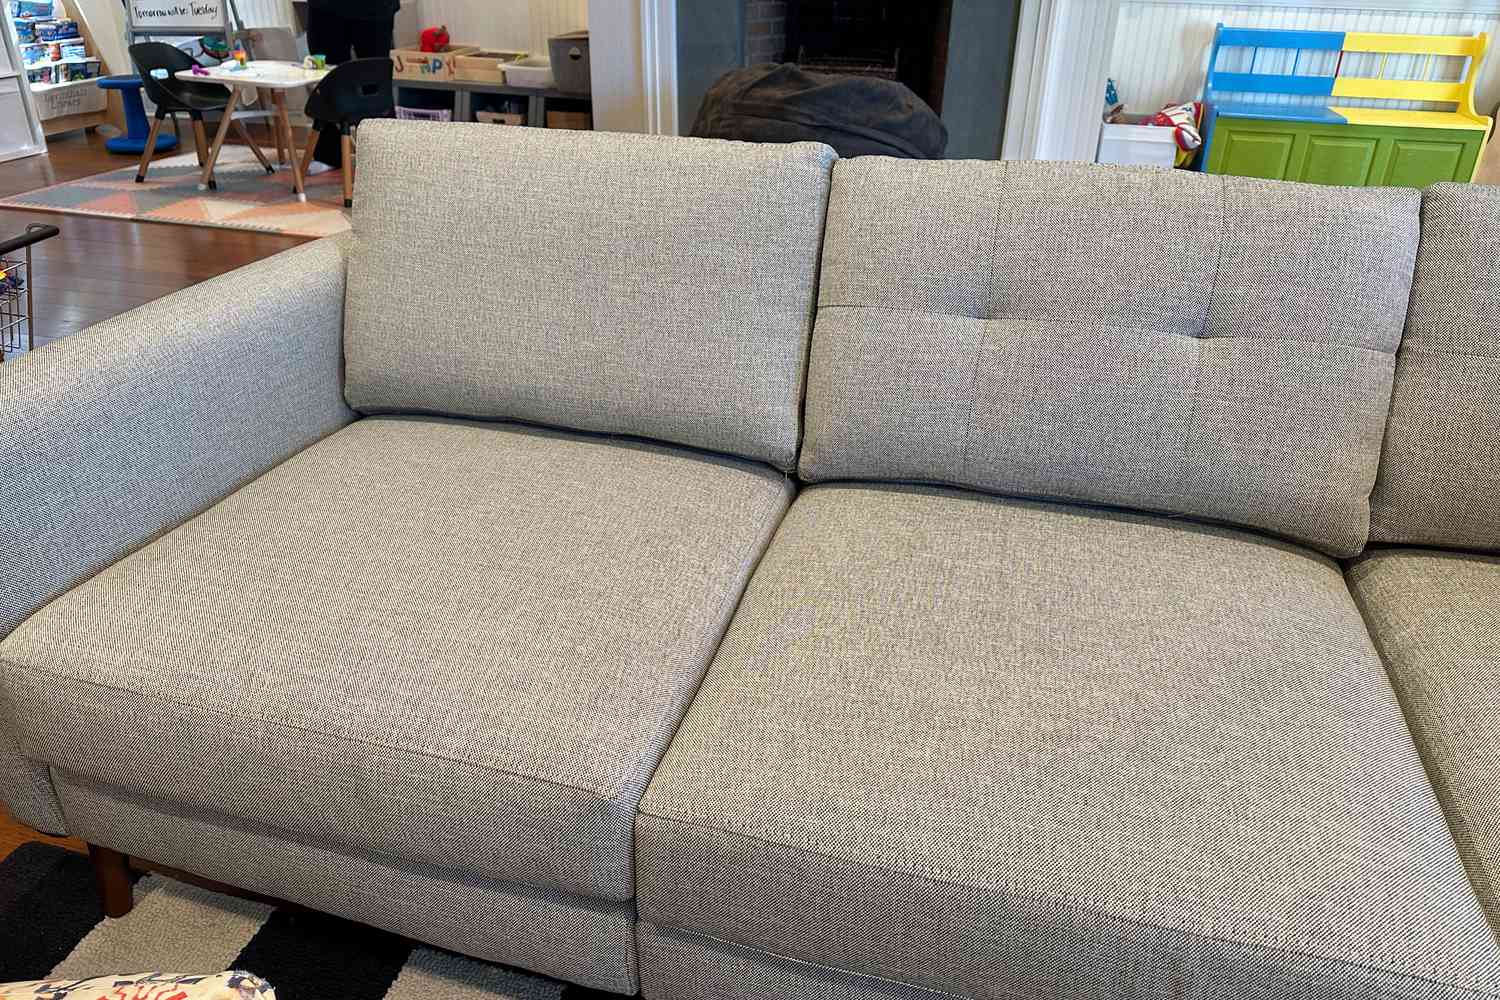 Burrow Block Nomad Sofa displayed in a home 